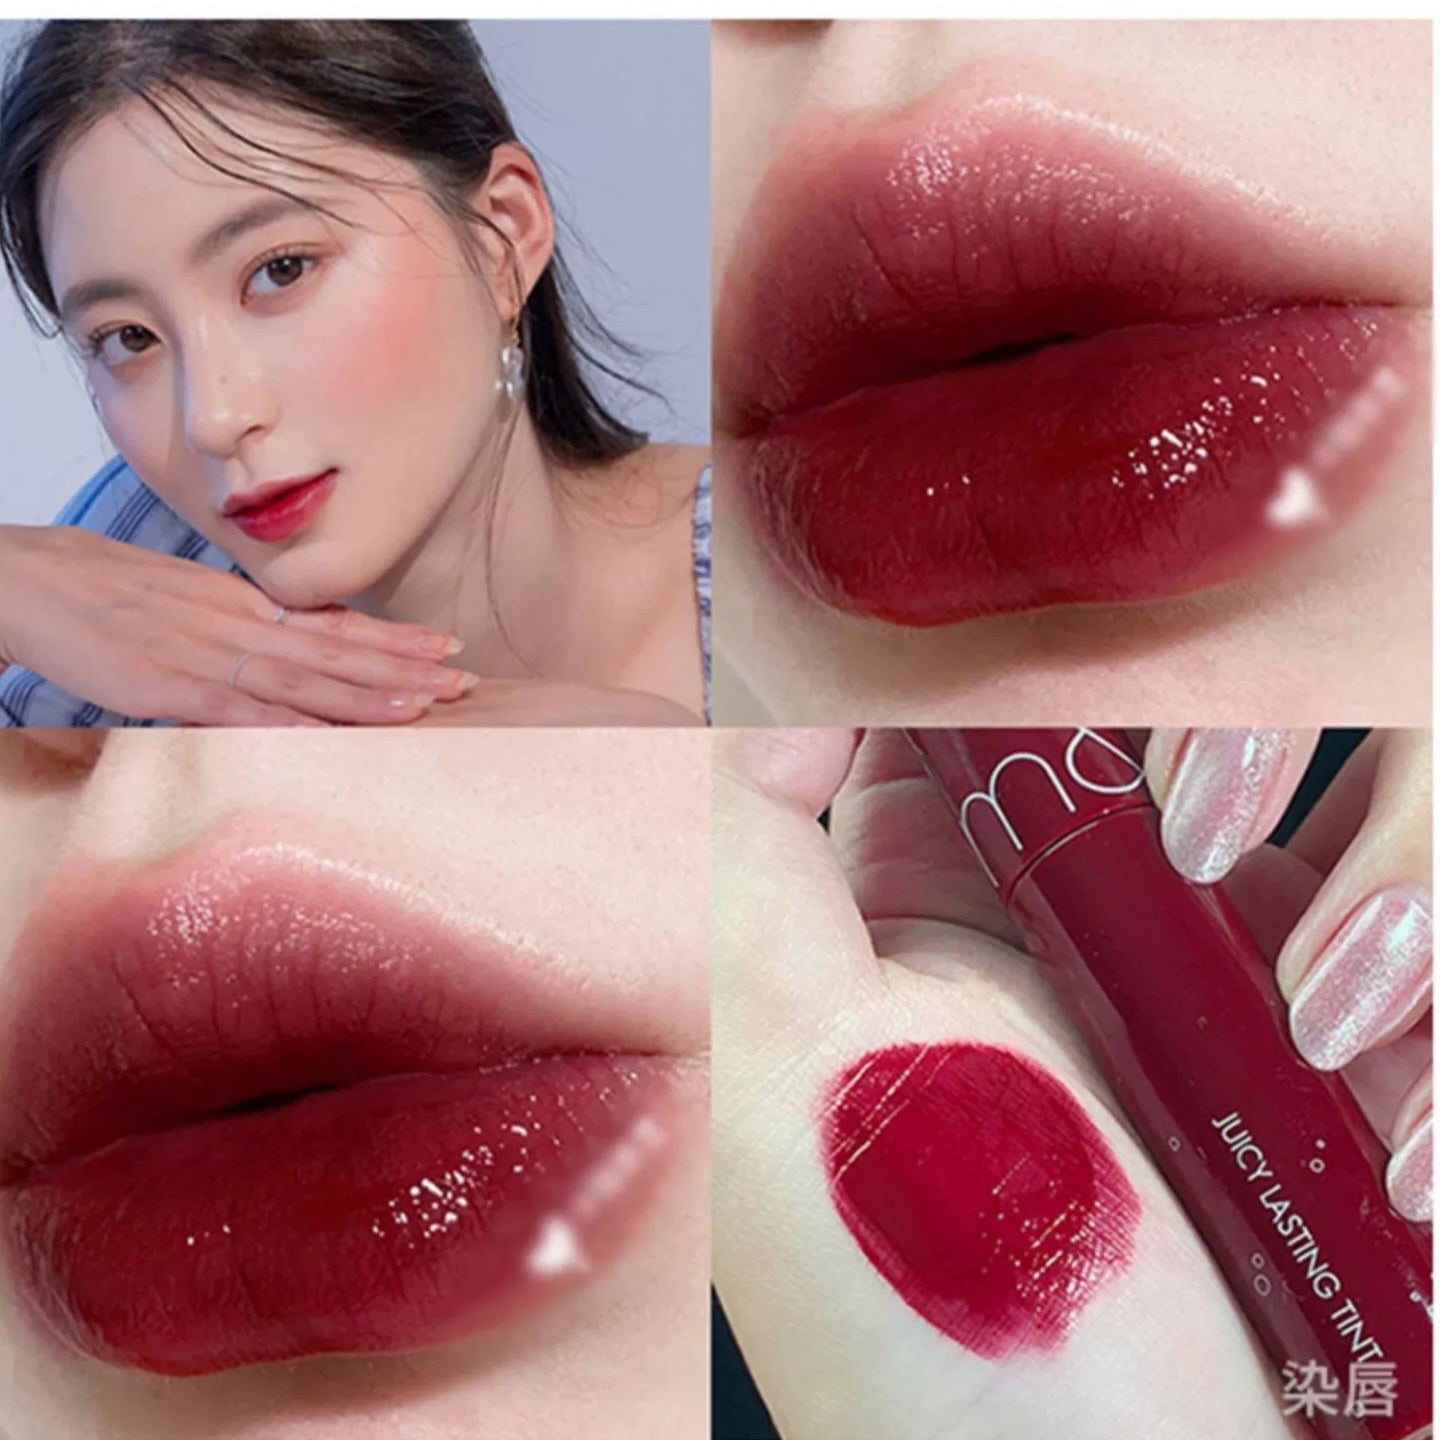 Rom&nd Juicy Lasting Tint Sparking Series #14 - #17 - Rom&nd